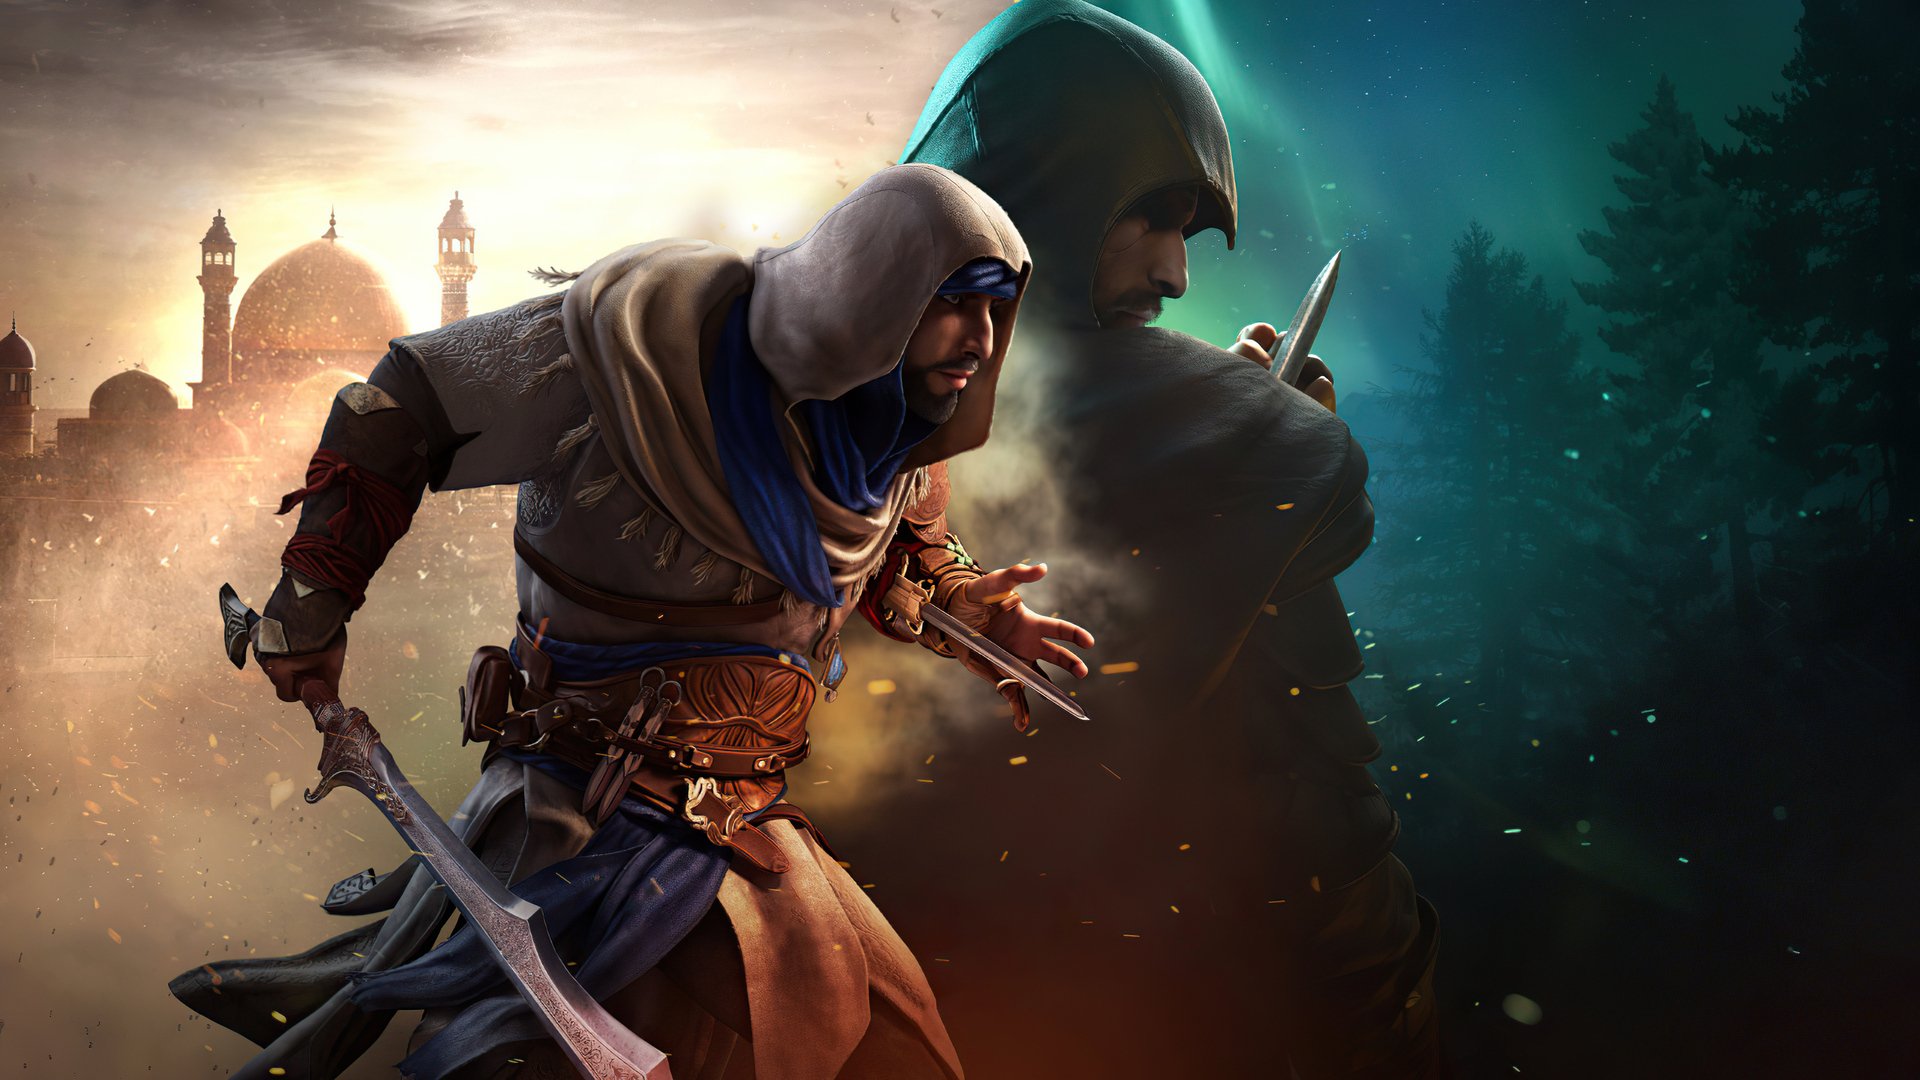 Assassin's Creed Mirage revealed: Baghdad entry is 'a tribute to the  original game